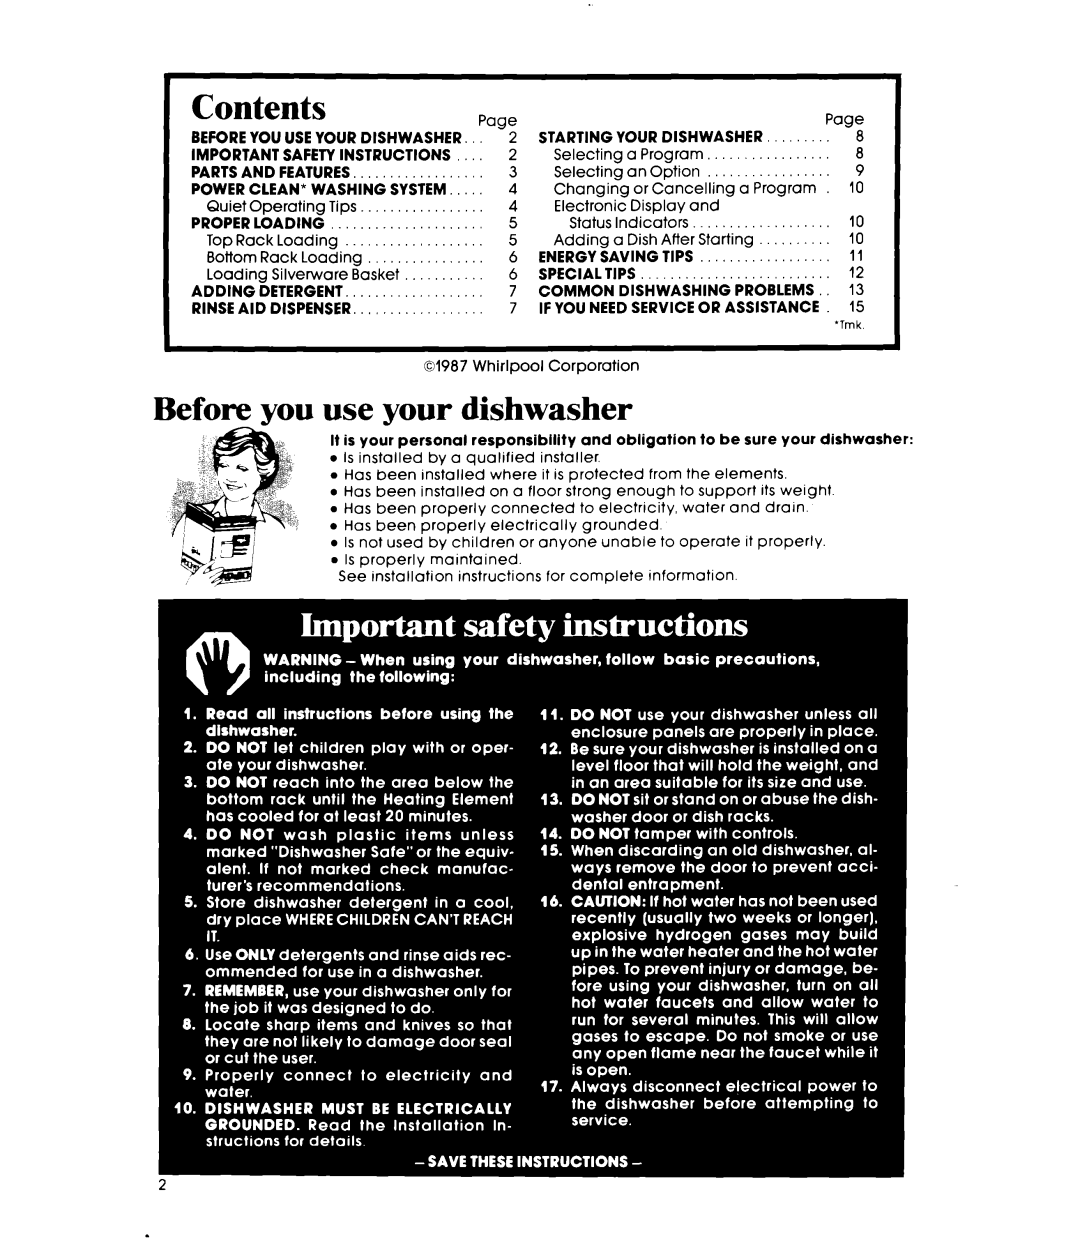 Whirlpool DU95OOXS manual Contents, Before you use your dishwasher 